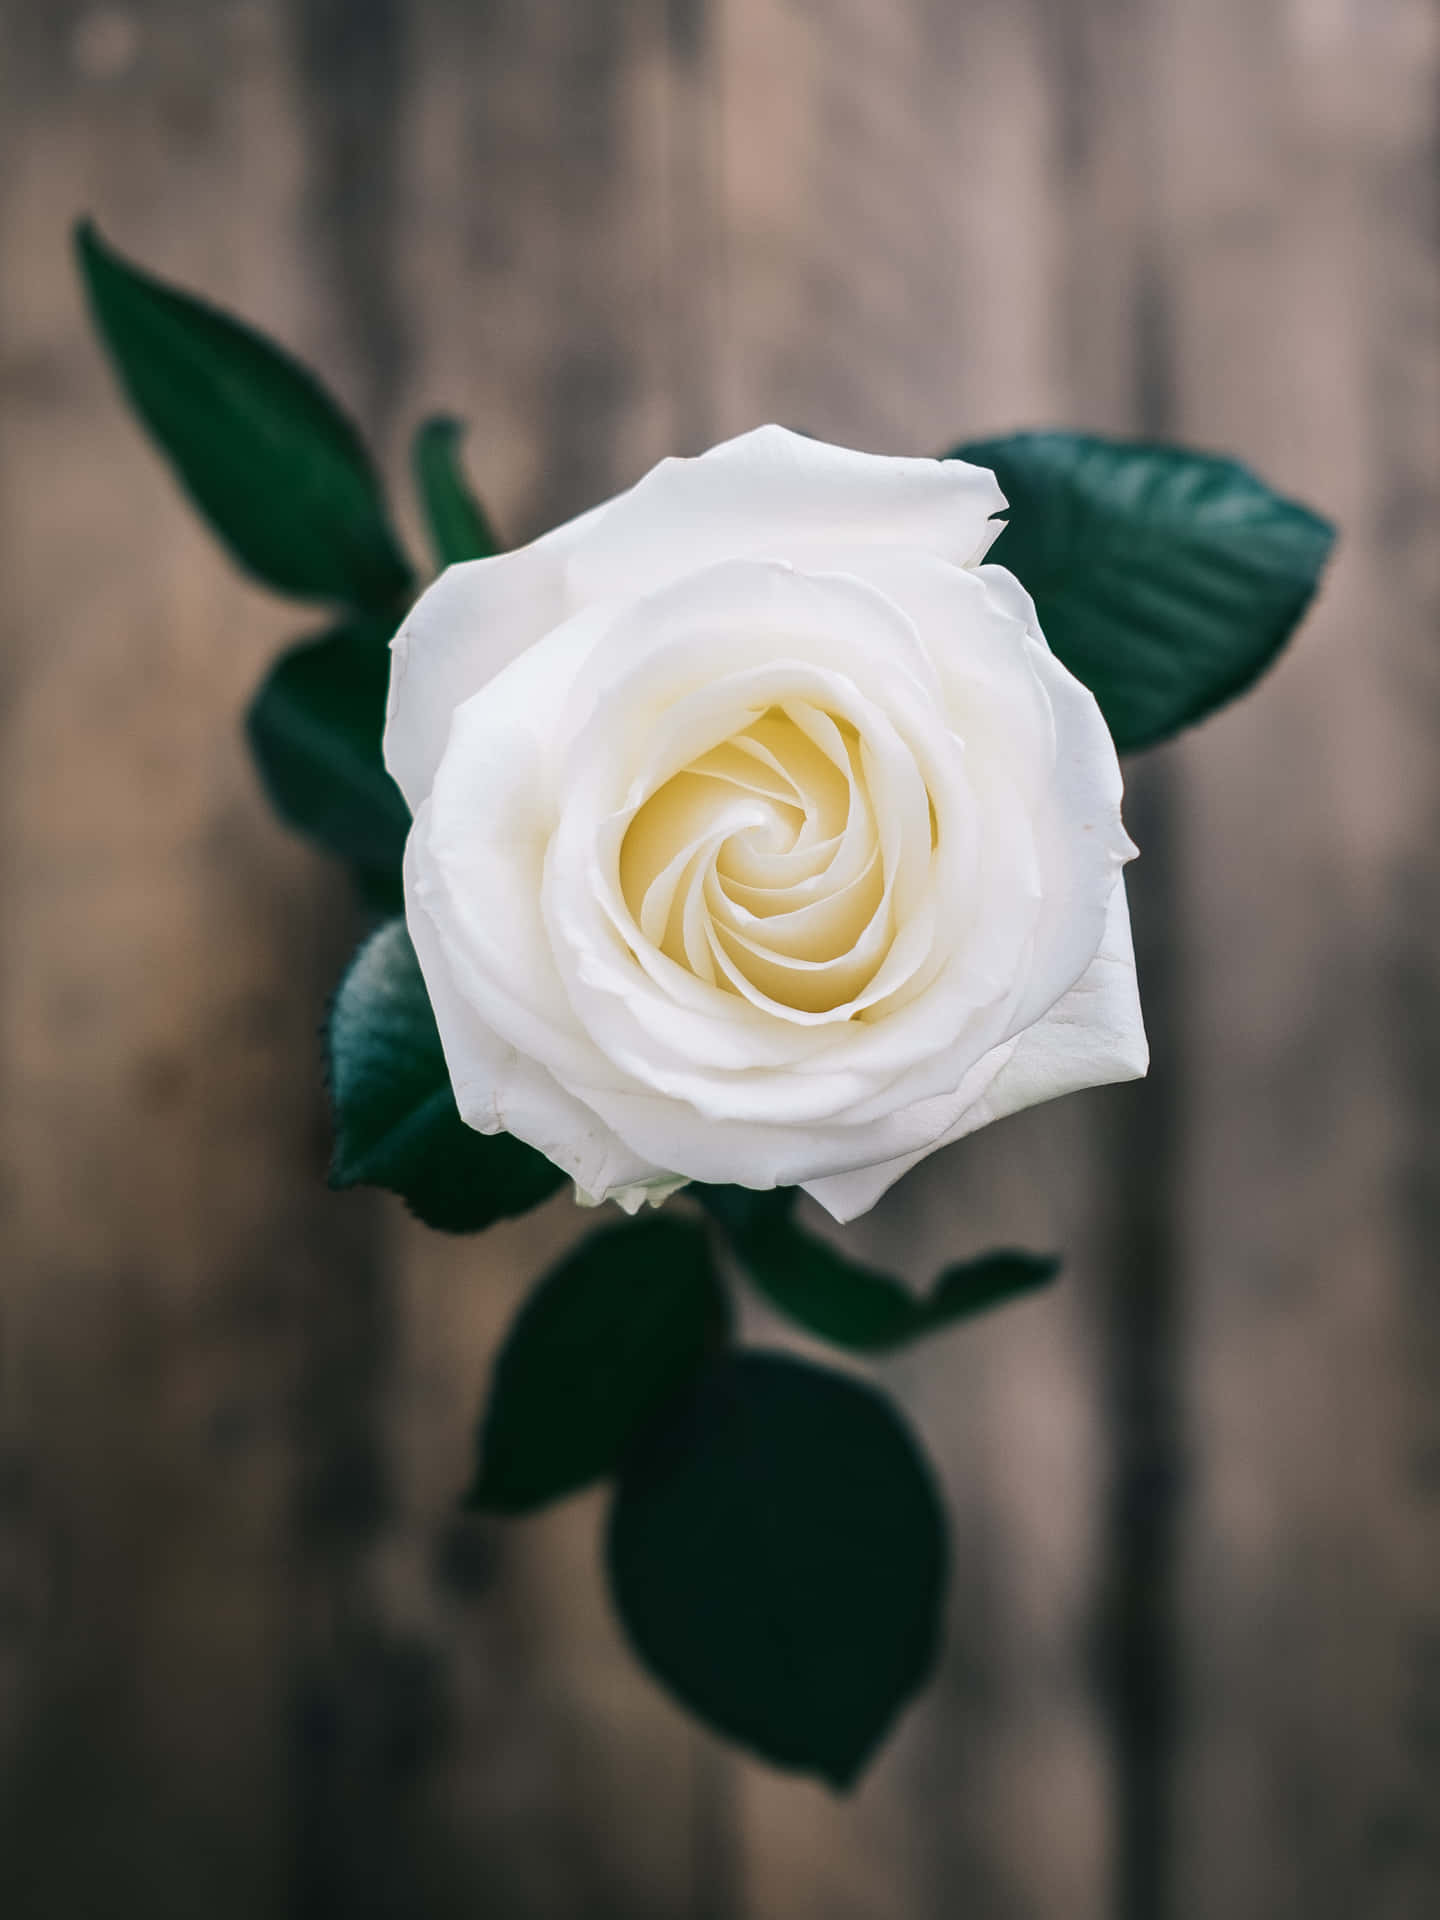 A single white rose standing against an abstract background